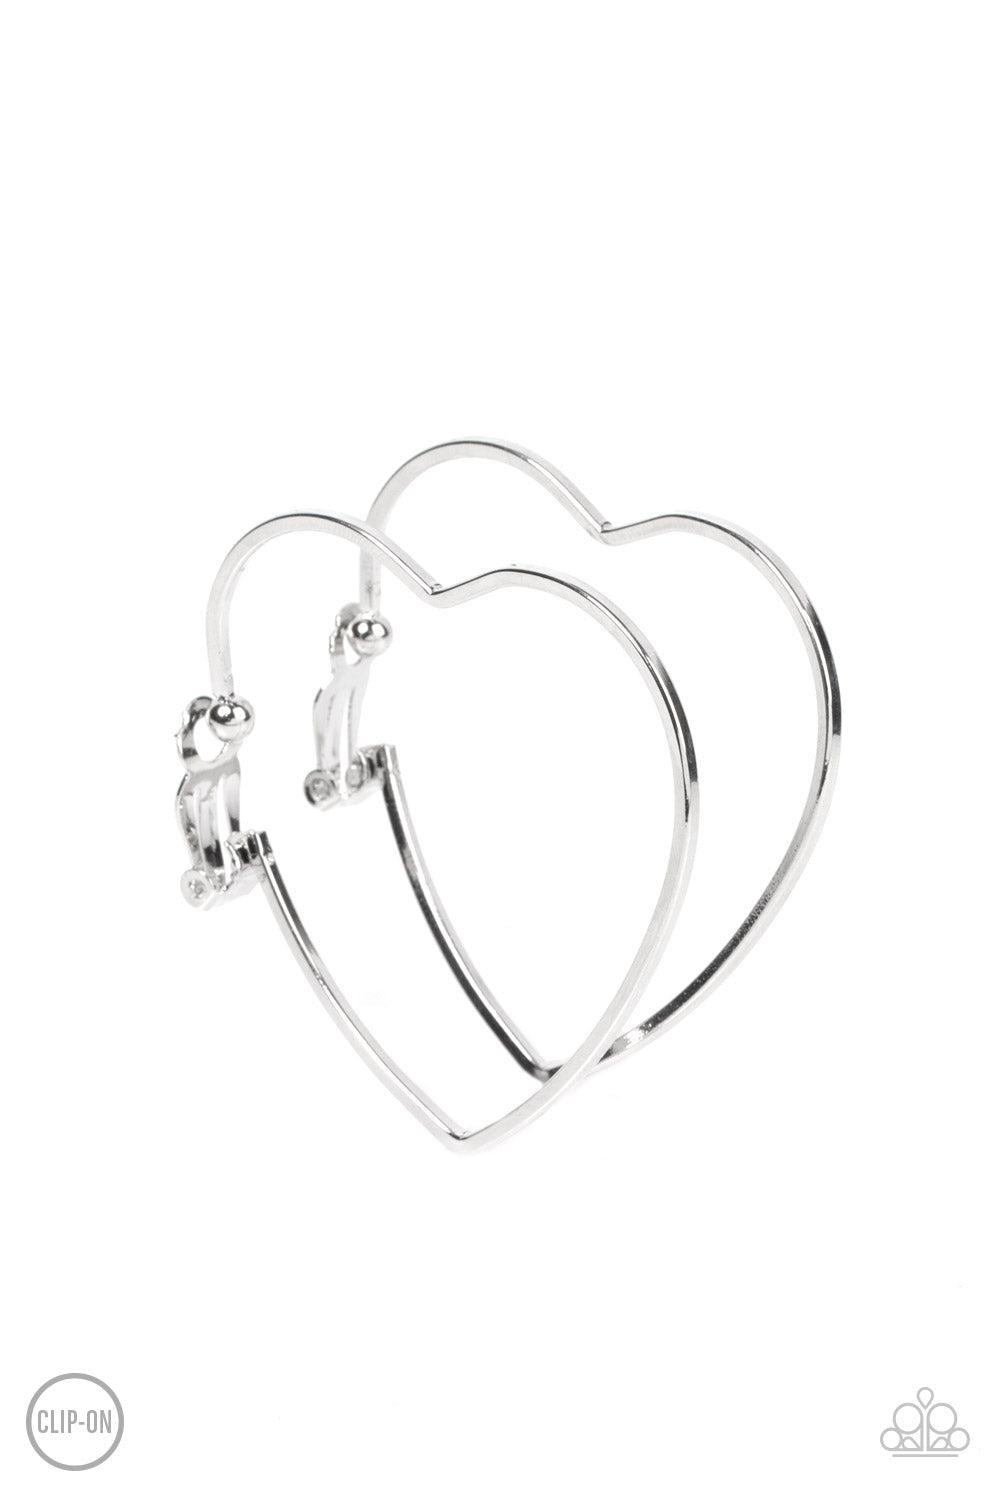 Harmonious Hearts Silver Clip-On Hoop Earrings - Paparazzi Accessories- lightbox - CarasShop.com - $5 Jewelry by Cara Jewels